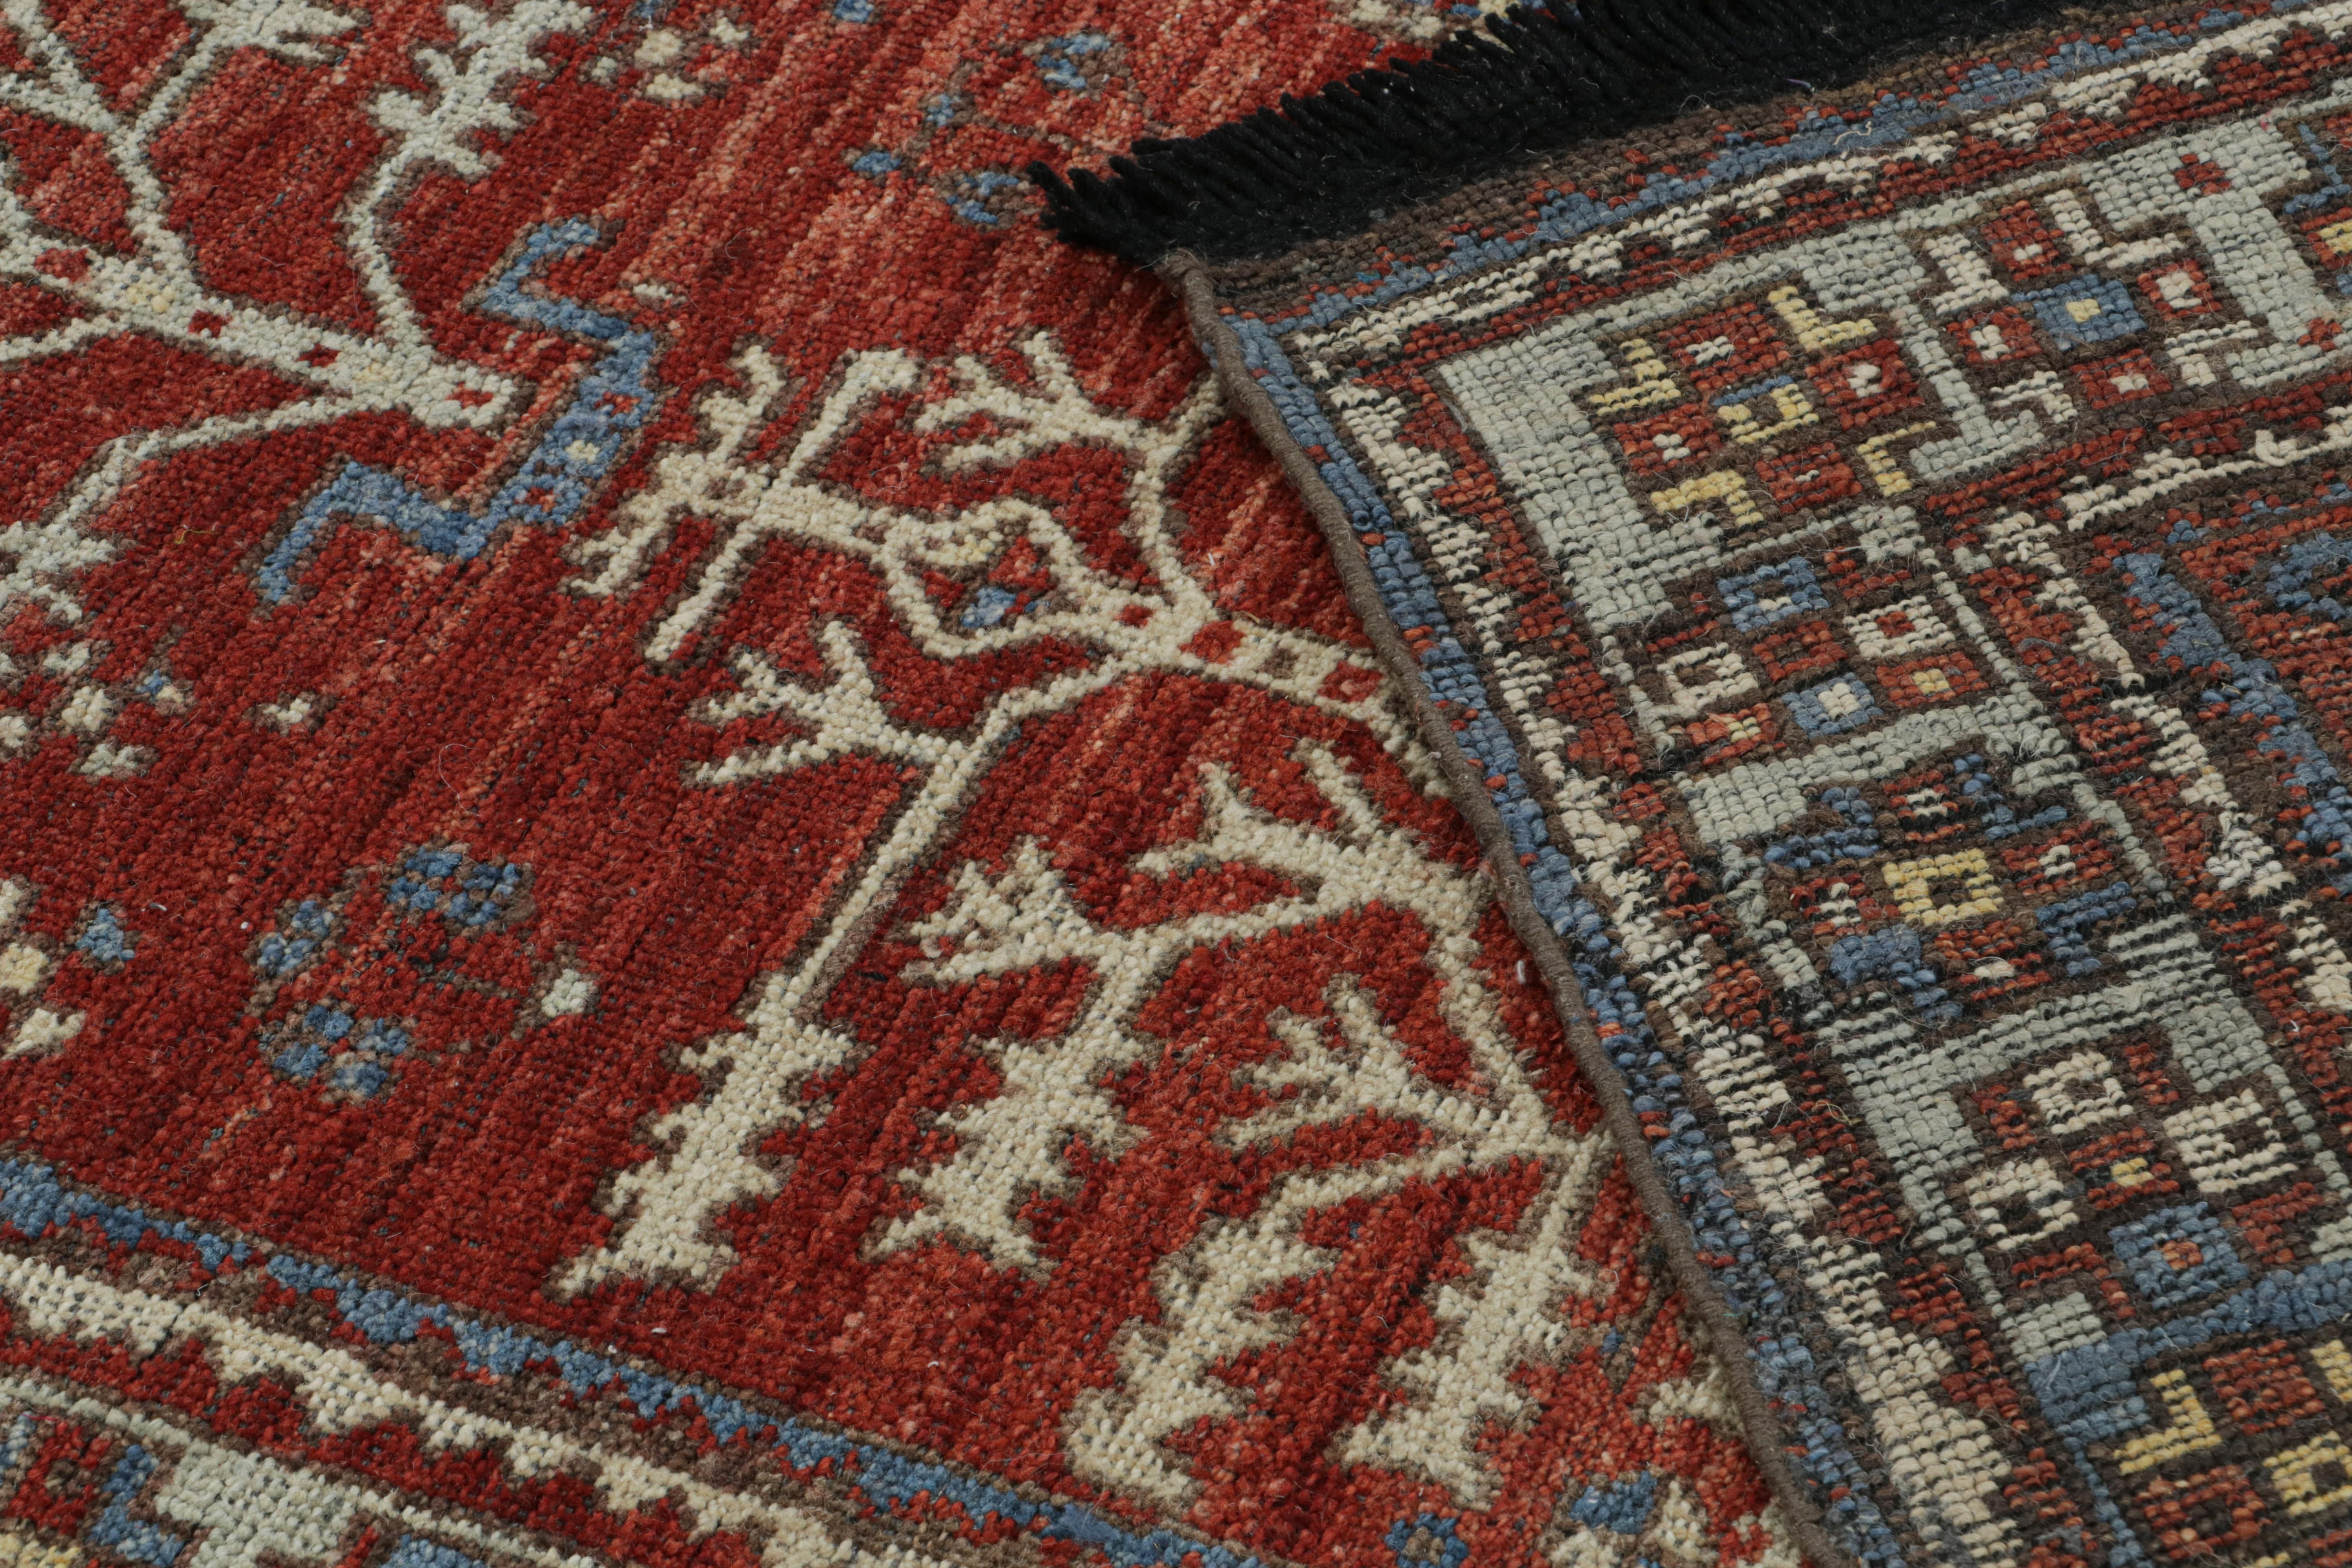 Wool Rug & Kilim’s Tribal Style Rug in Red with Pictorials and Geometric Patterns For Sale